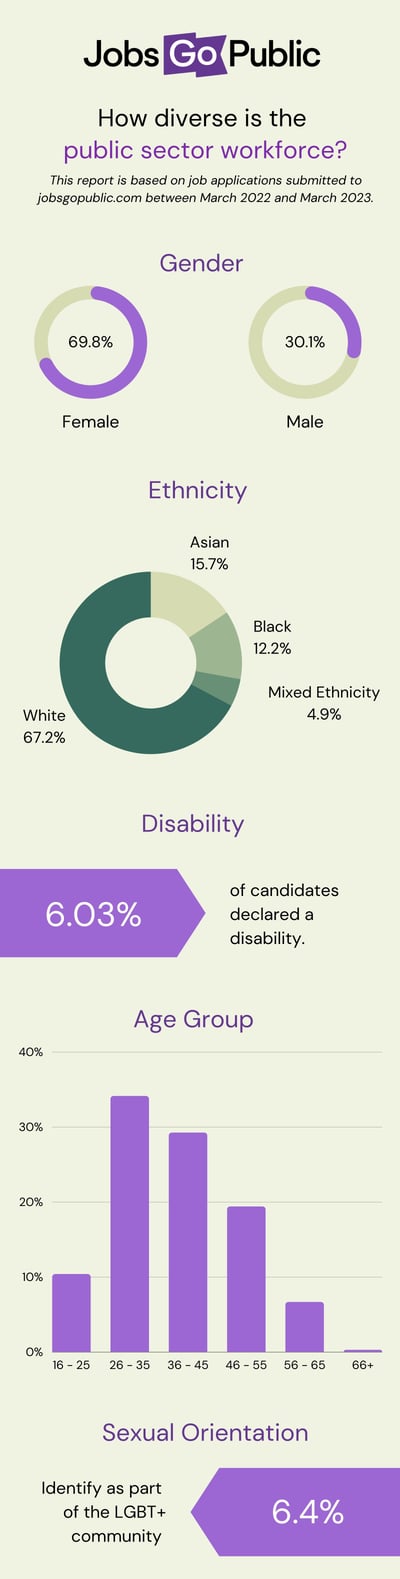 Beige infographic: How diverse is the public sector workforce? This report is based on job applications submitted to jobsgopublic.com between March 2022 and March 2023. Stats: Gender: 69.8% Female, Ethnicity: 67.2% White, 15.7% Asian, 12.2% Black, 4.9% Mixed ethnicity. Disability: 6.03% of candidates declared a disability. Age group: 10% aged 16-25, 34% aged 26-35, 29% aged 36-45, 19% aged 46-55, 7% aged 56-65. Sexual orientation: 6.4% identify as part of the LGBT+ community.